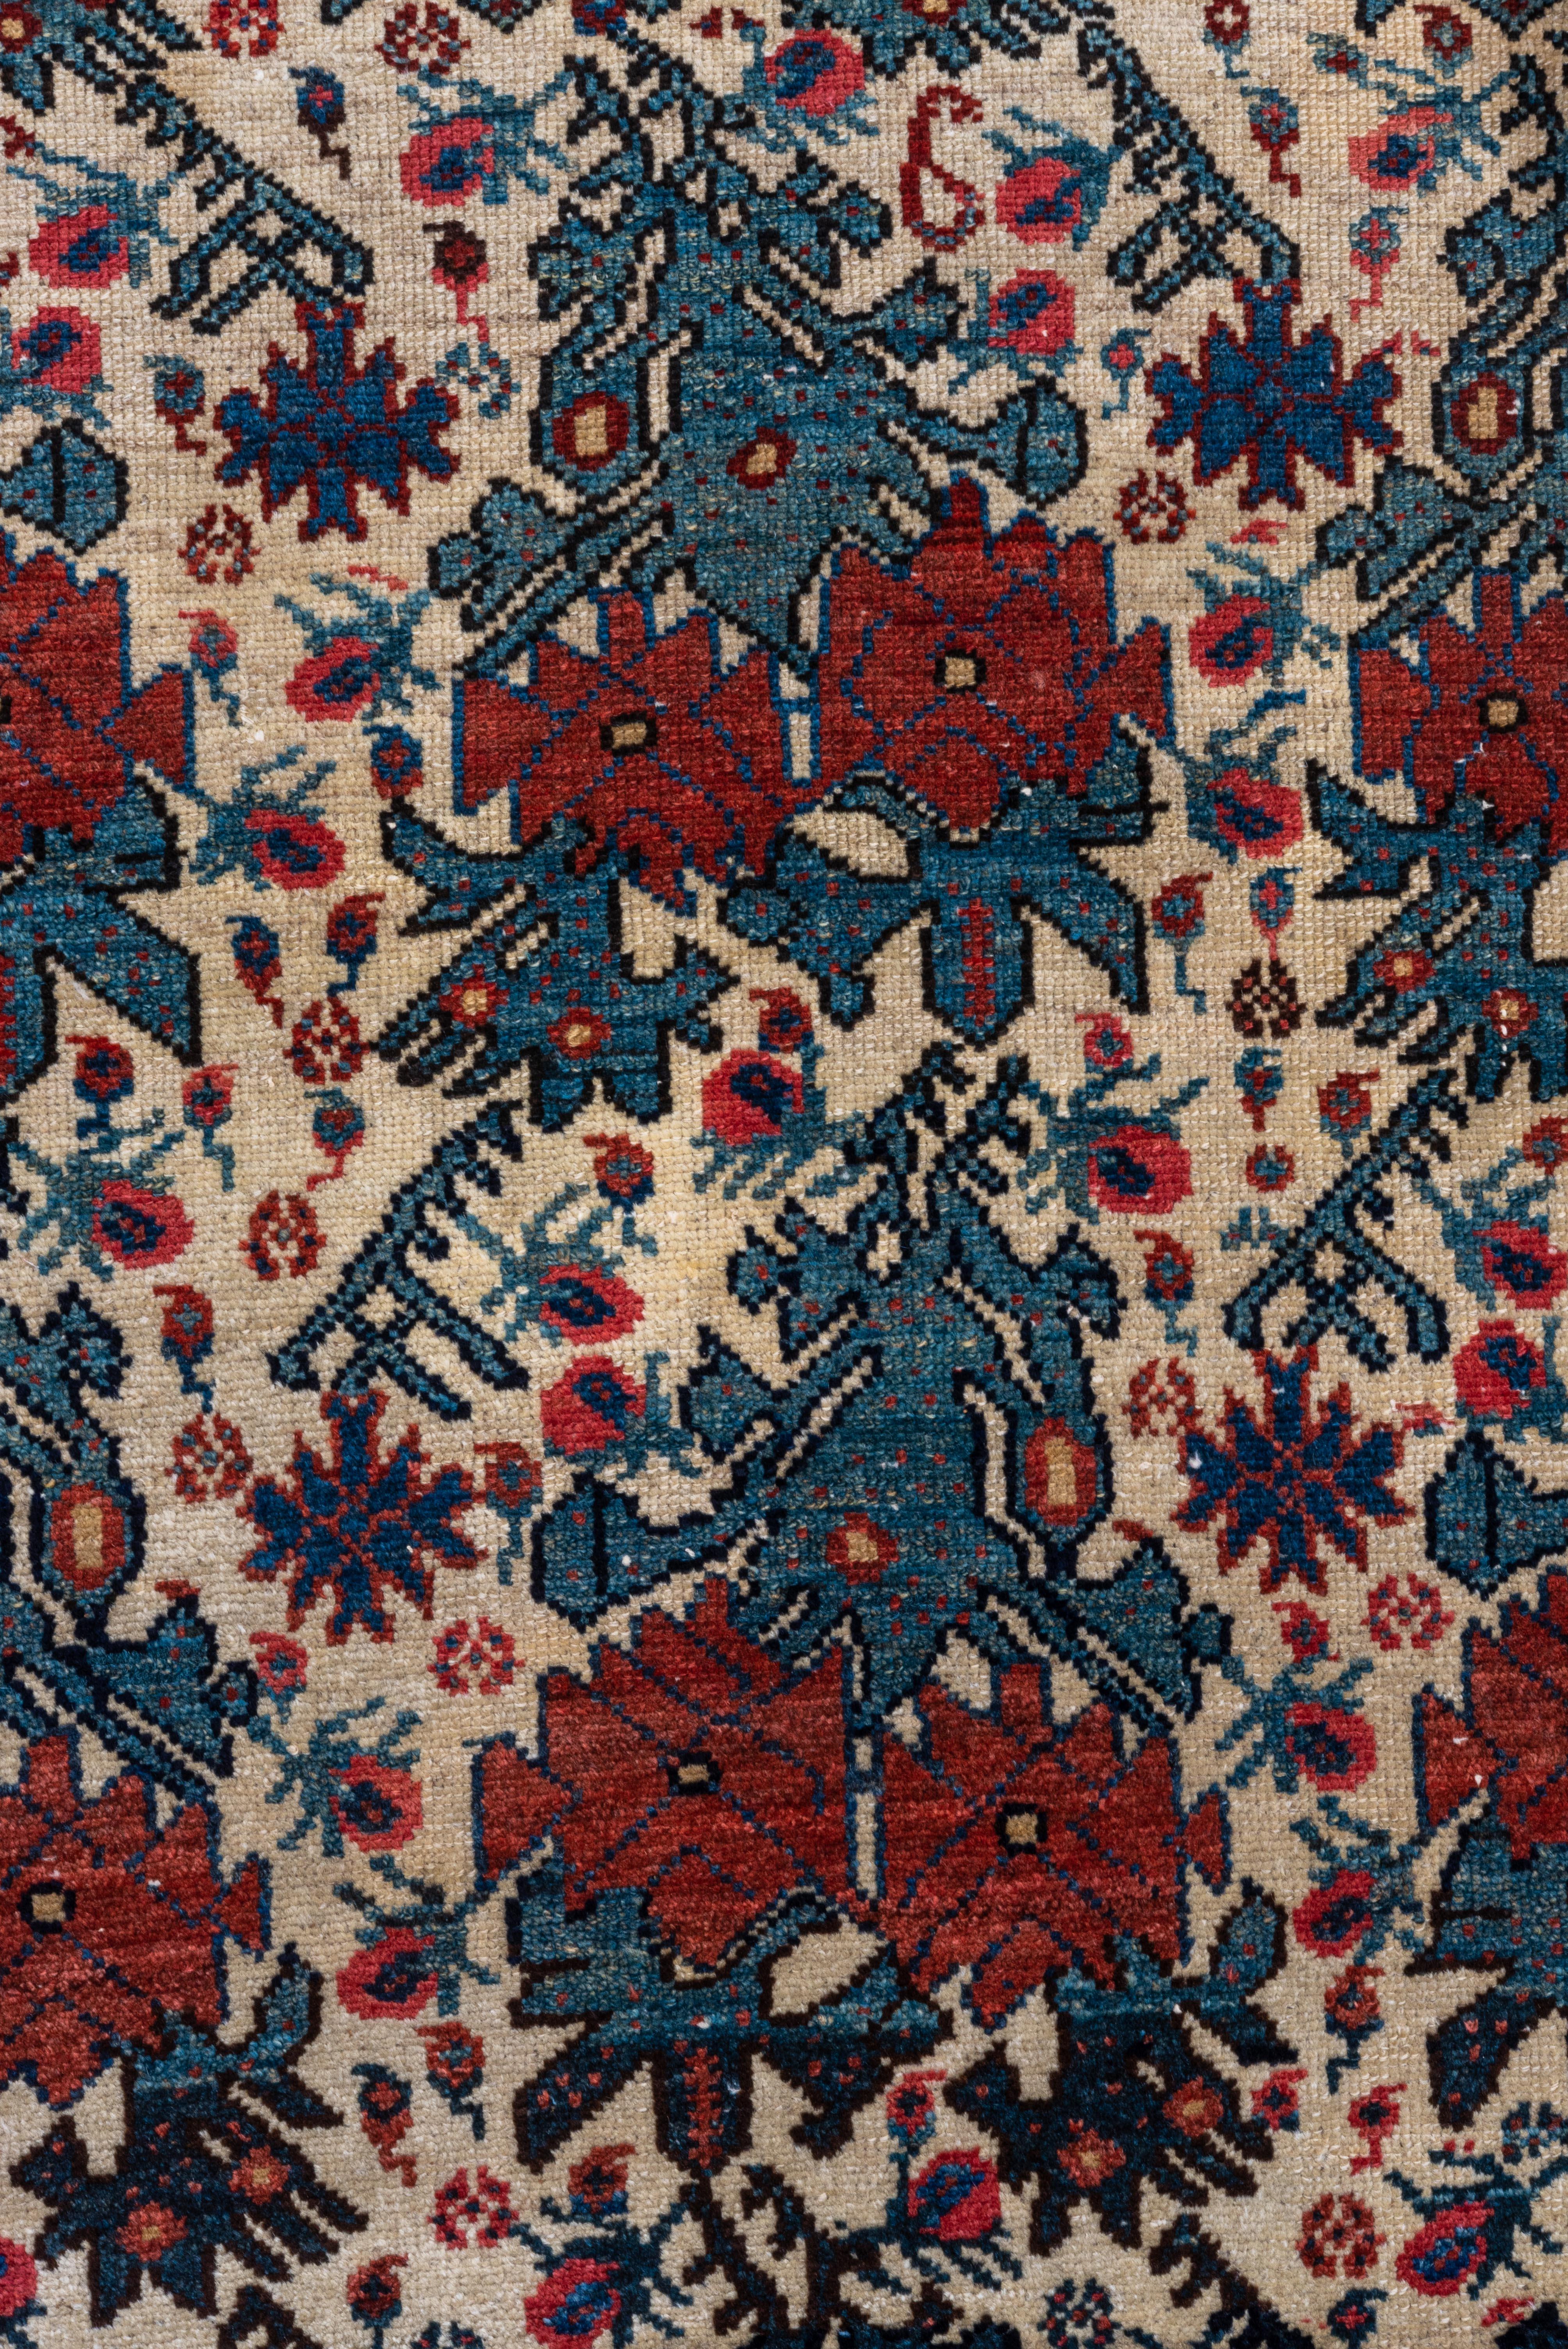 12 Rose Florets Across Center Field - Malayer Rug - Antique 1940 For Sale 2